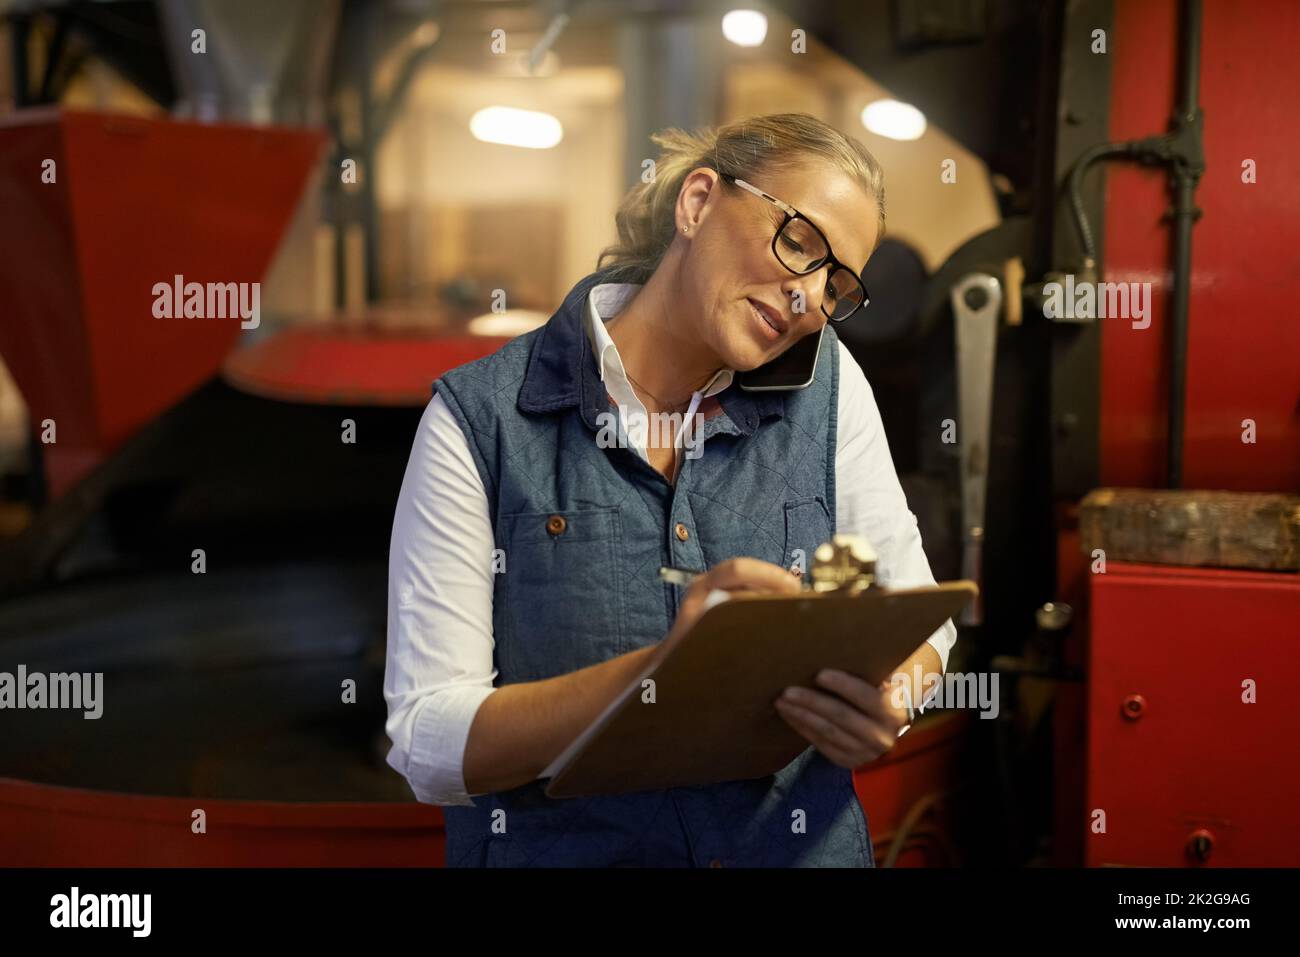 Multitasking like a pro. Shot of an industrious entrepreneur answering her phone while working in her roastery. Stock Photo